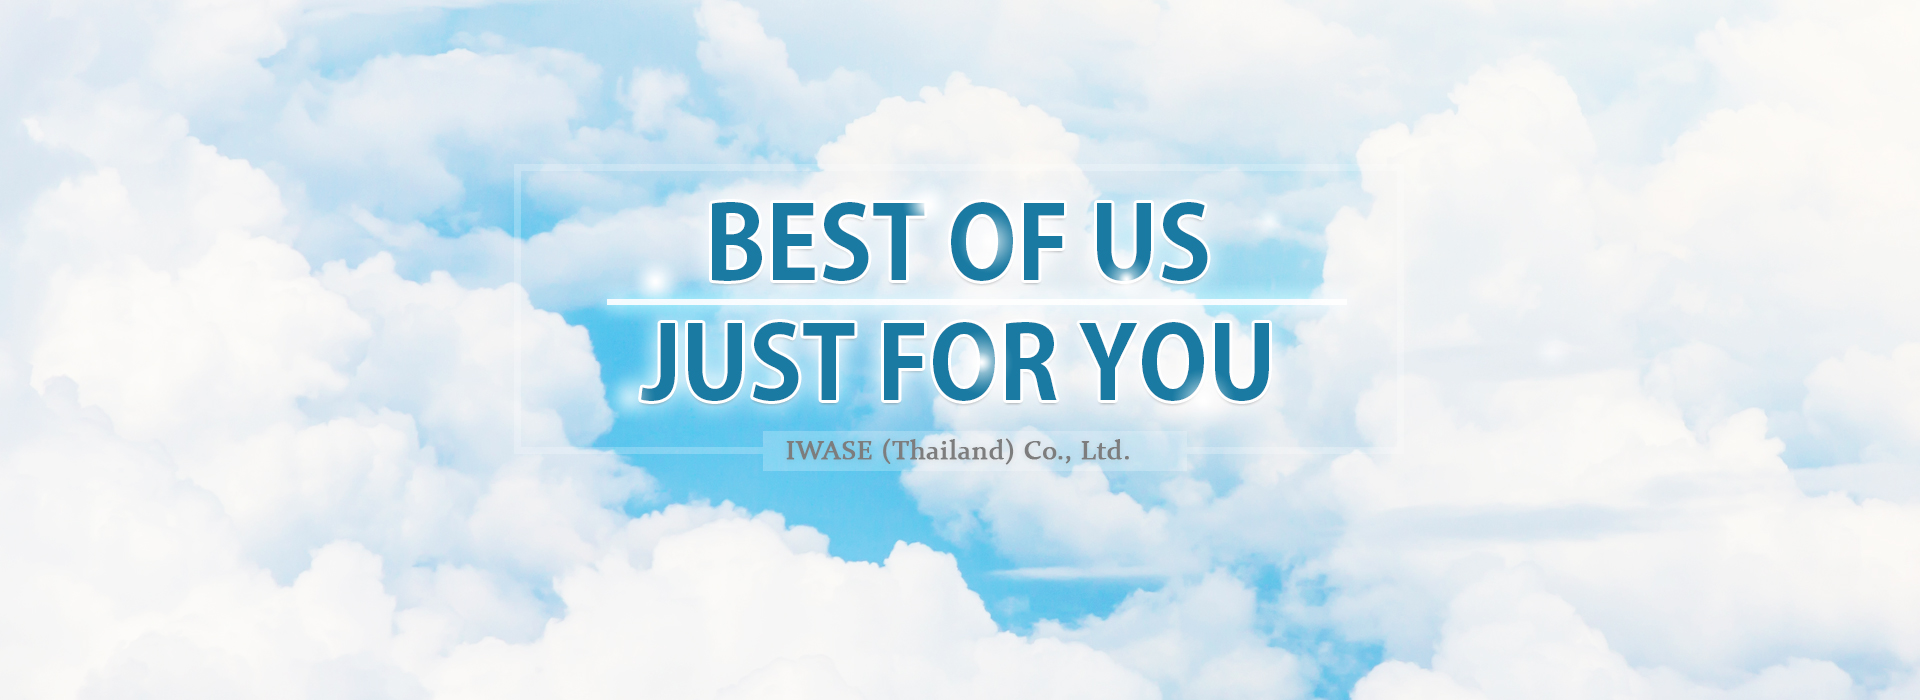 BEST OF US JUST FOR YOU IWASE (THAILAND) CO., LTD.